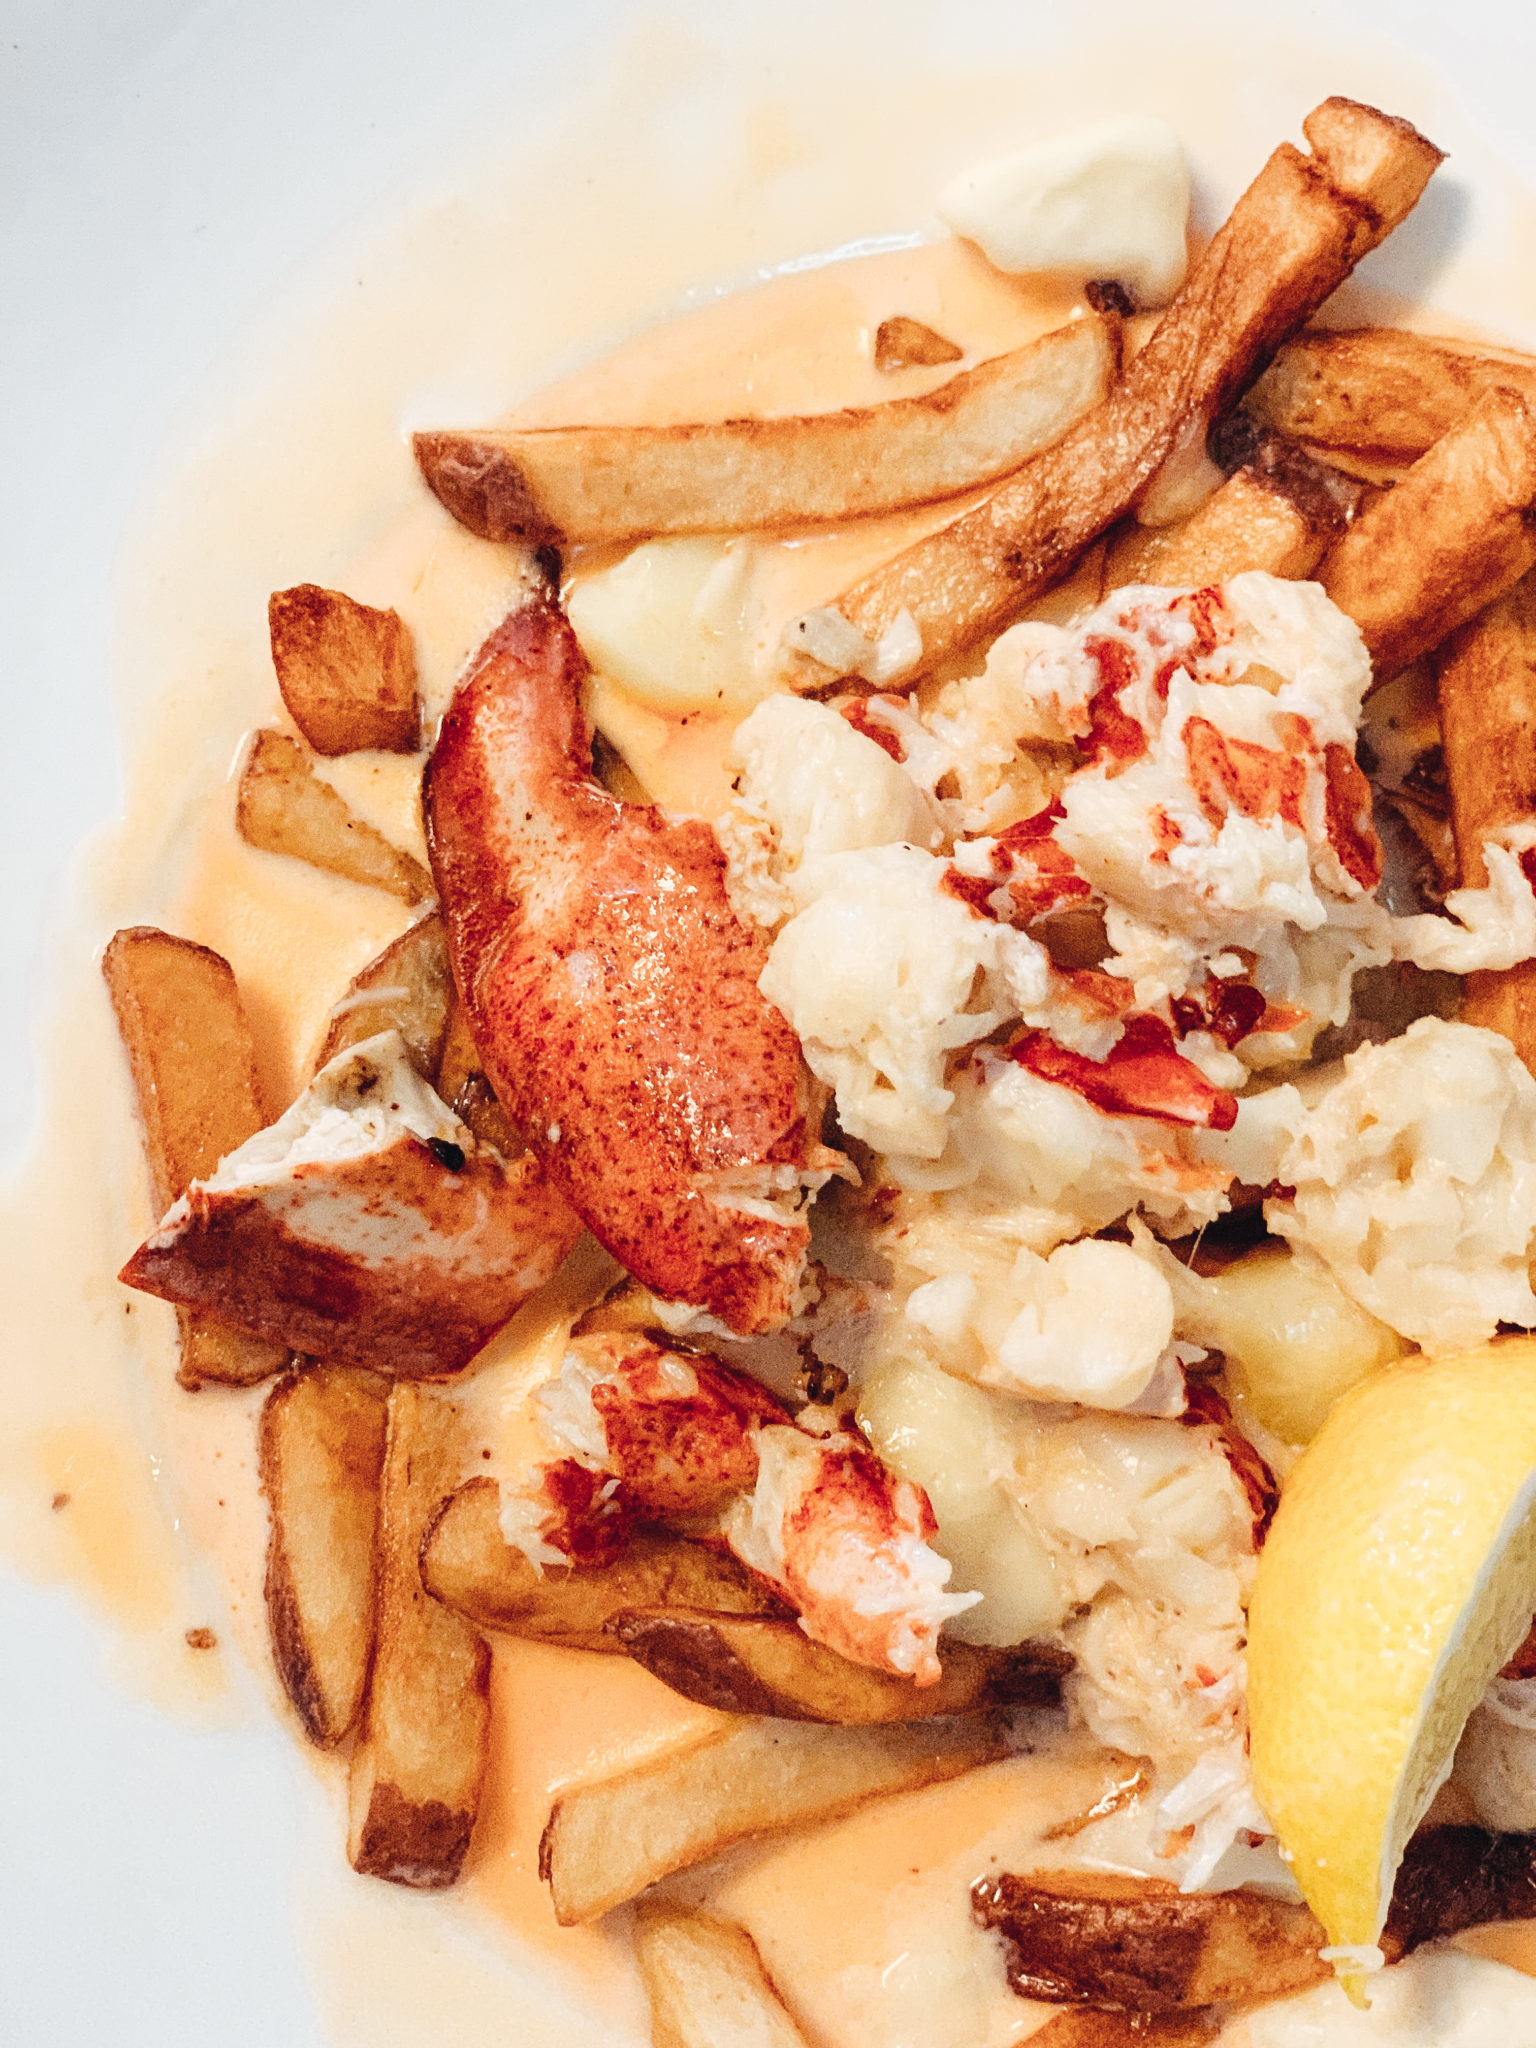 The Ultimate Lobster Feast at Captain Kat's Lobster Shack reviewed by top international travel blogger, Shannon Shipman